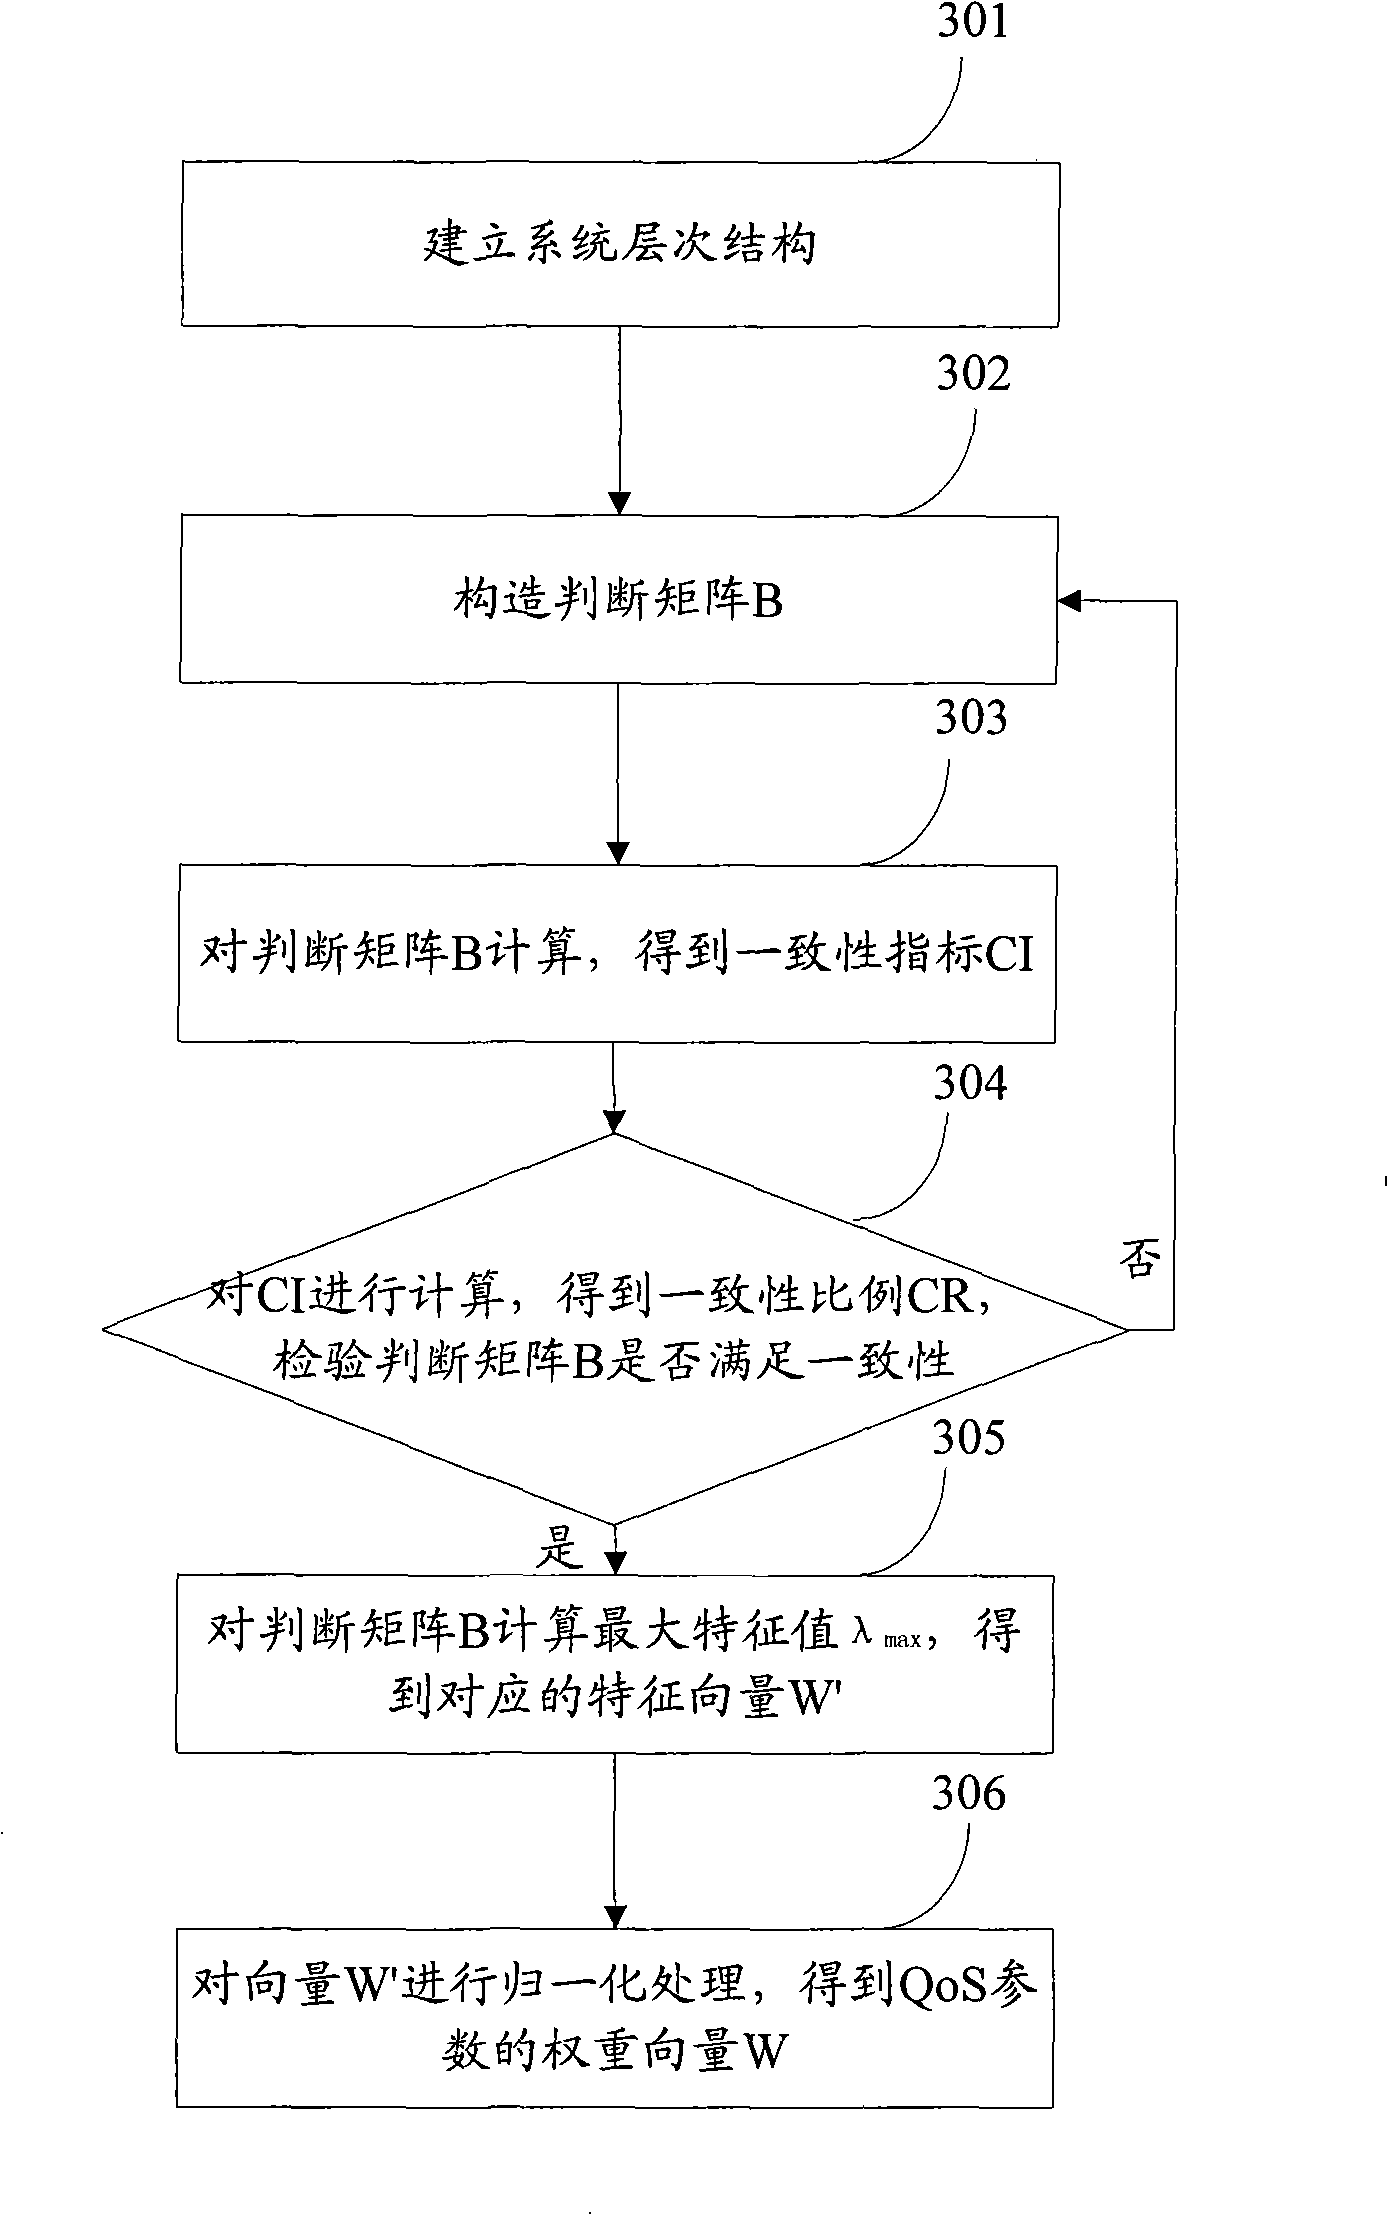 Method and apparatus implementing network resource selection